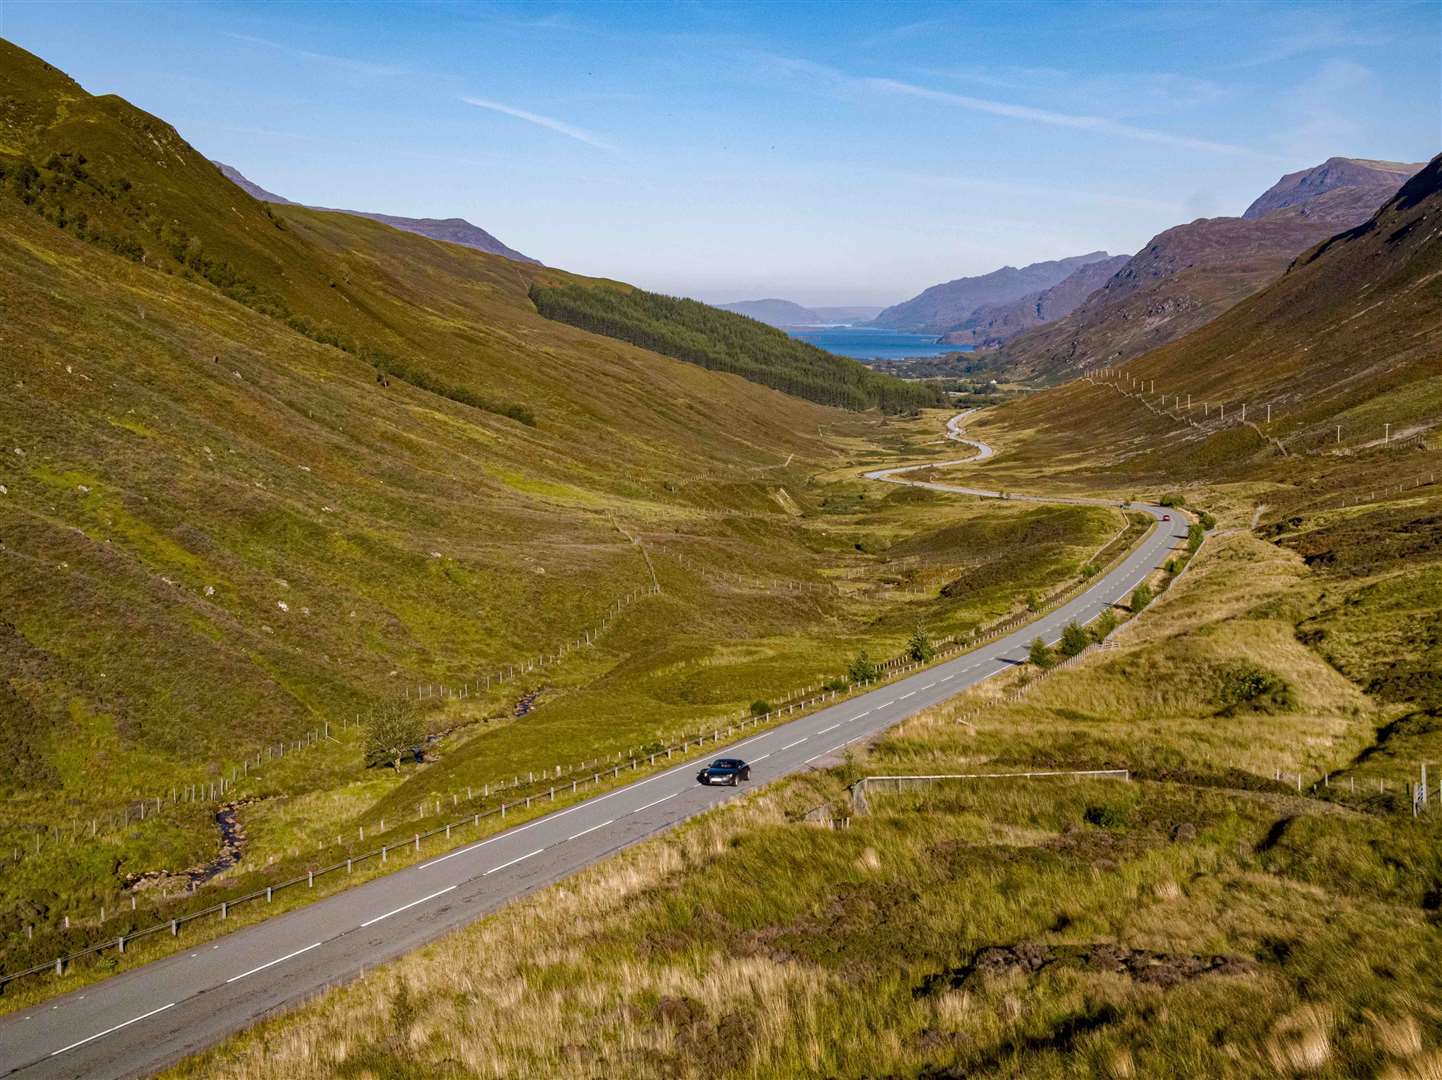 NC500 visitors indicated that they plan to spend an average of 11 days exploring the region. Picture: Steven Gourlay Photography